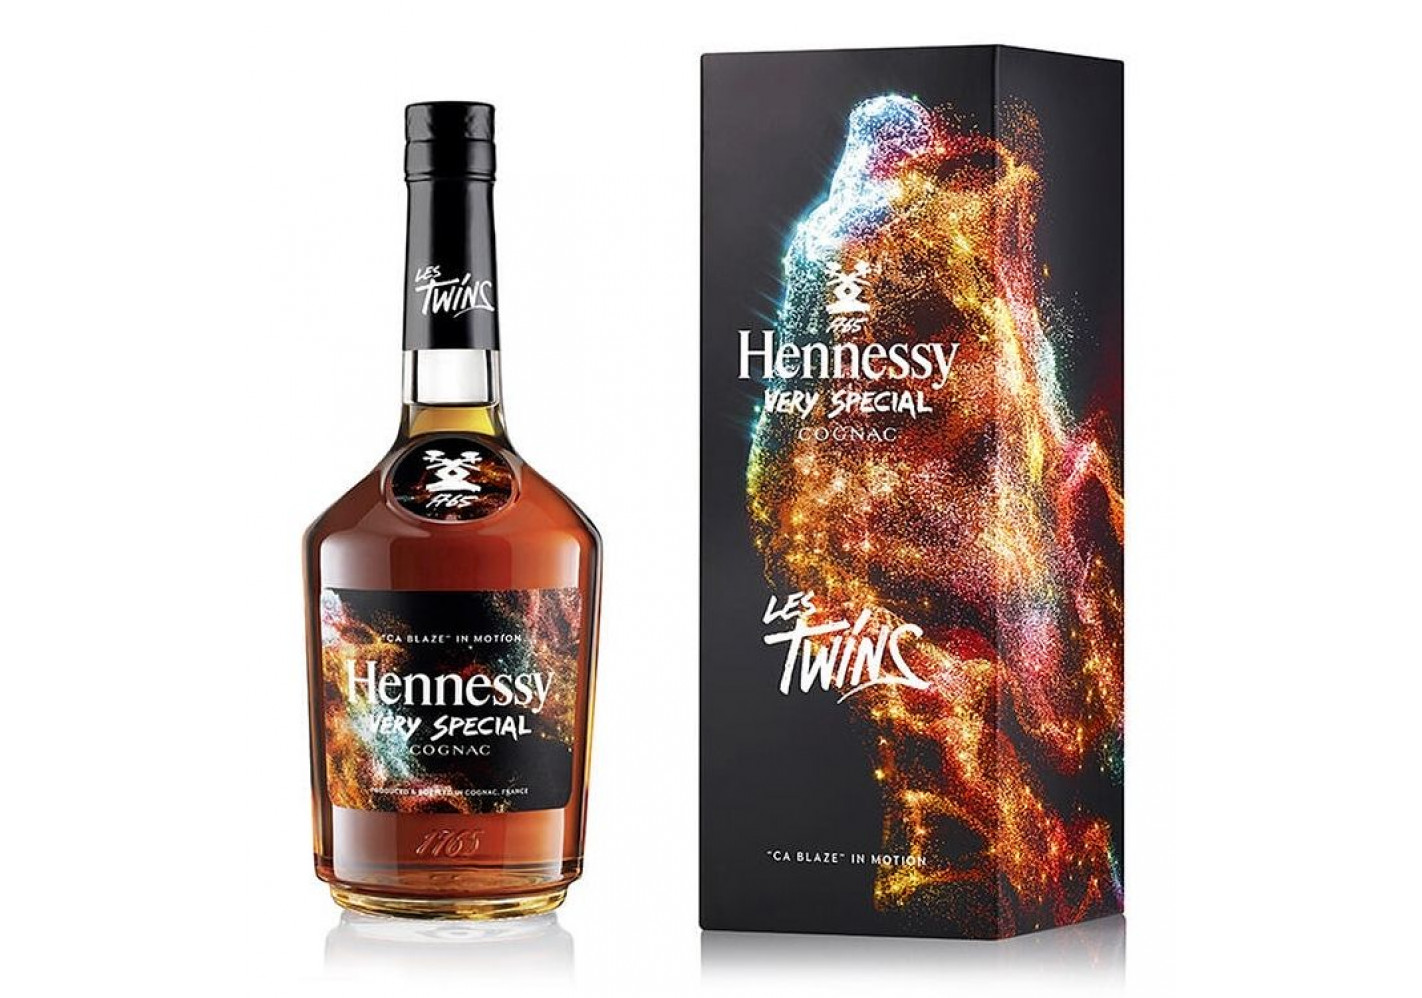 Hennessy VS Limited Edition by Les TWINS "CA BLAZE"